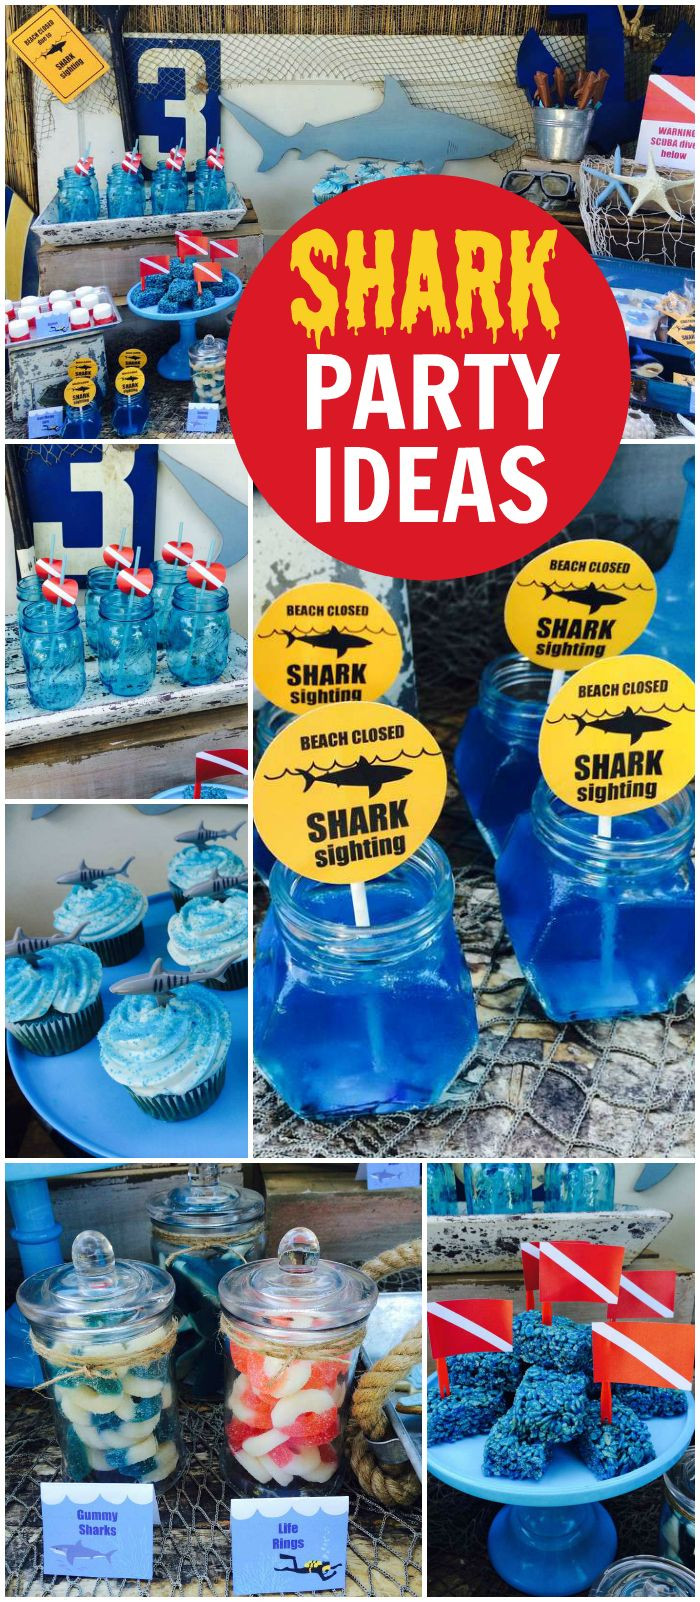 Boy Summer Birthday Party Ideas
 This shark theme is perfect for a pool party See more